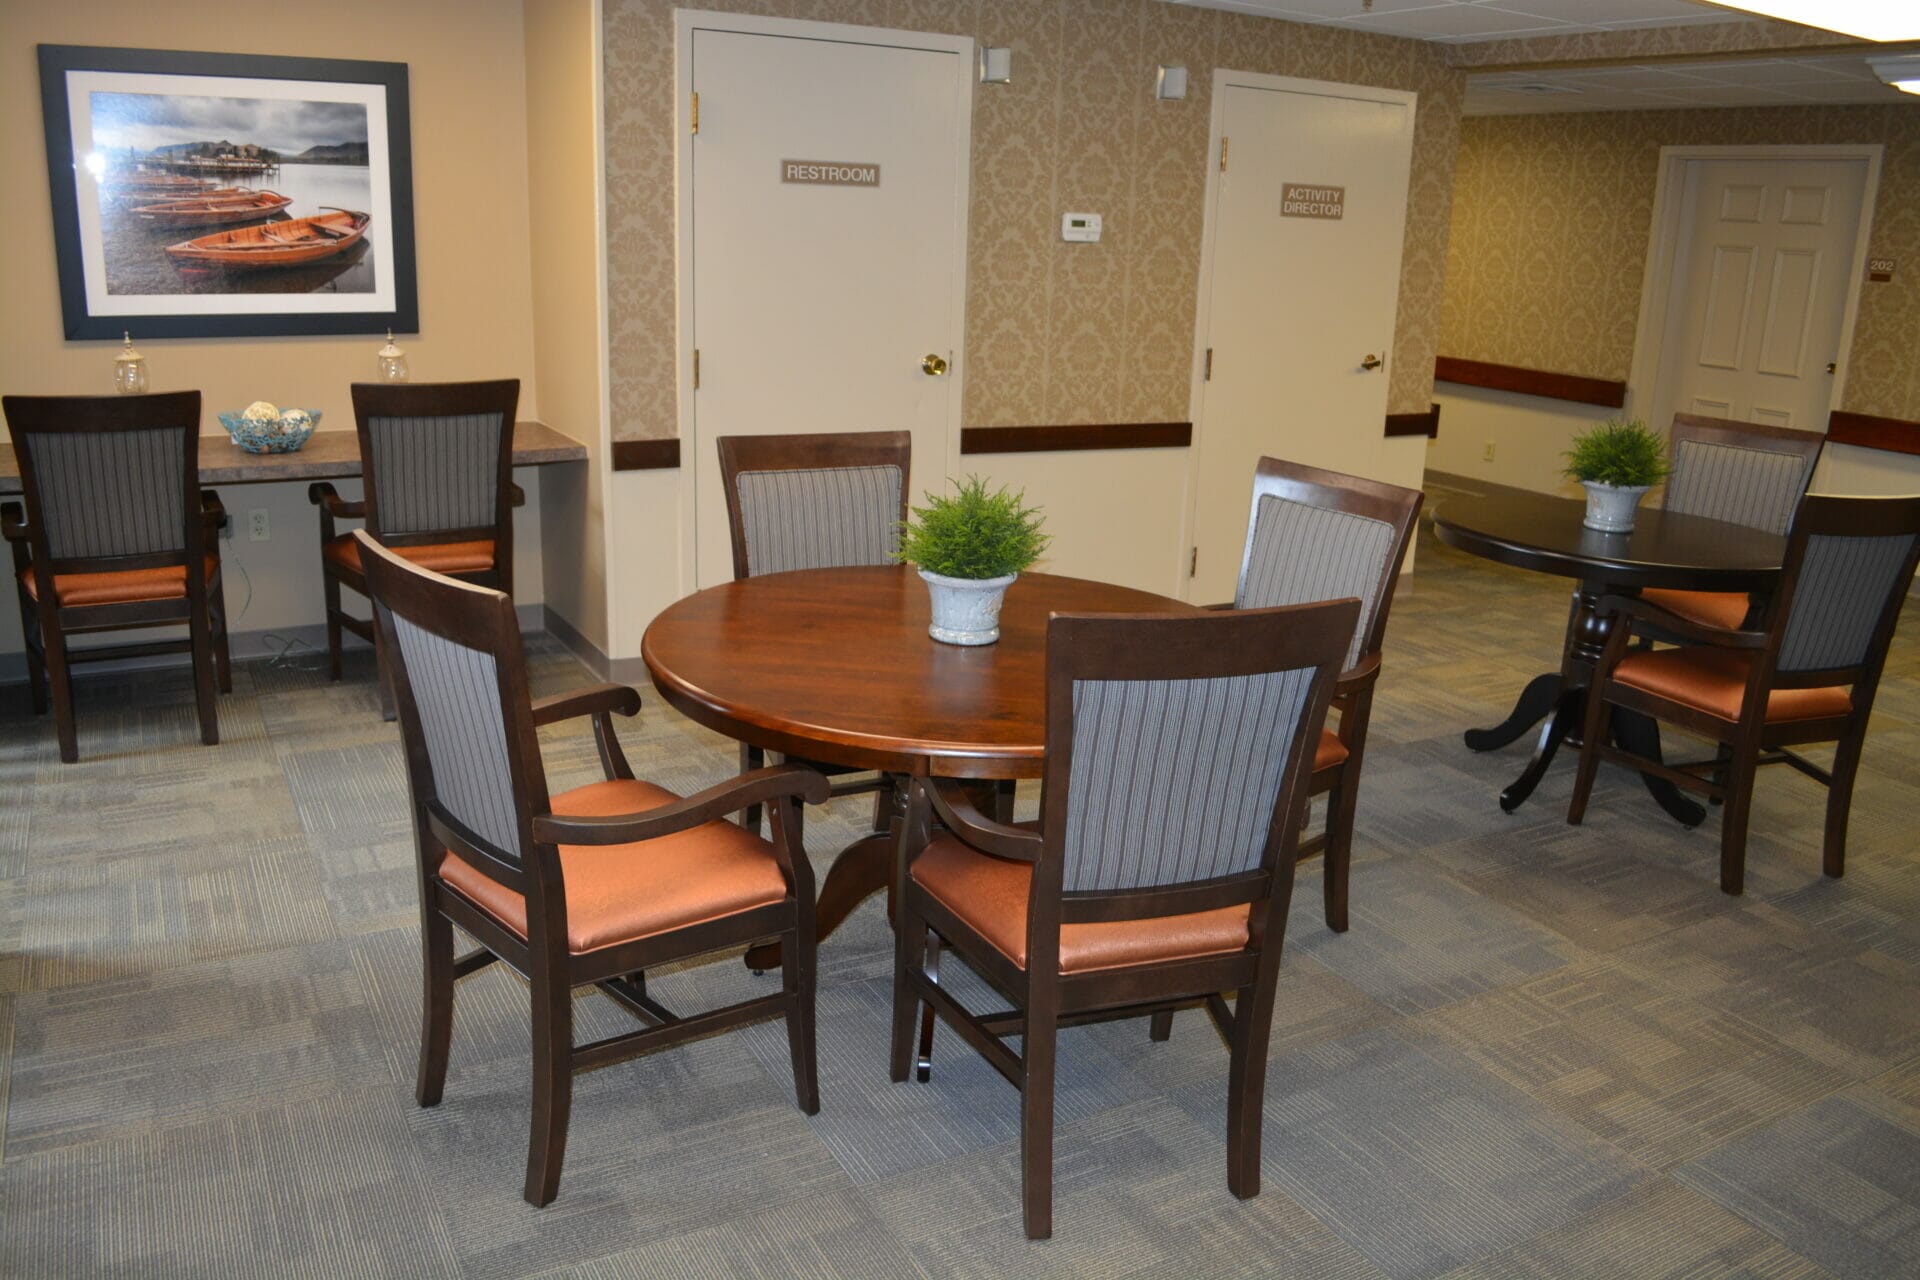 <span  class="uc_style_uc_tiles_grid_image_elementor_uc_items_attribute_title" style="color:#000000;">Lounge area at Bethany Village Assisted Living Apartments.</span>